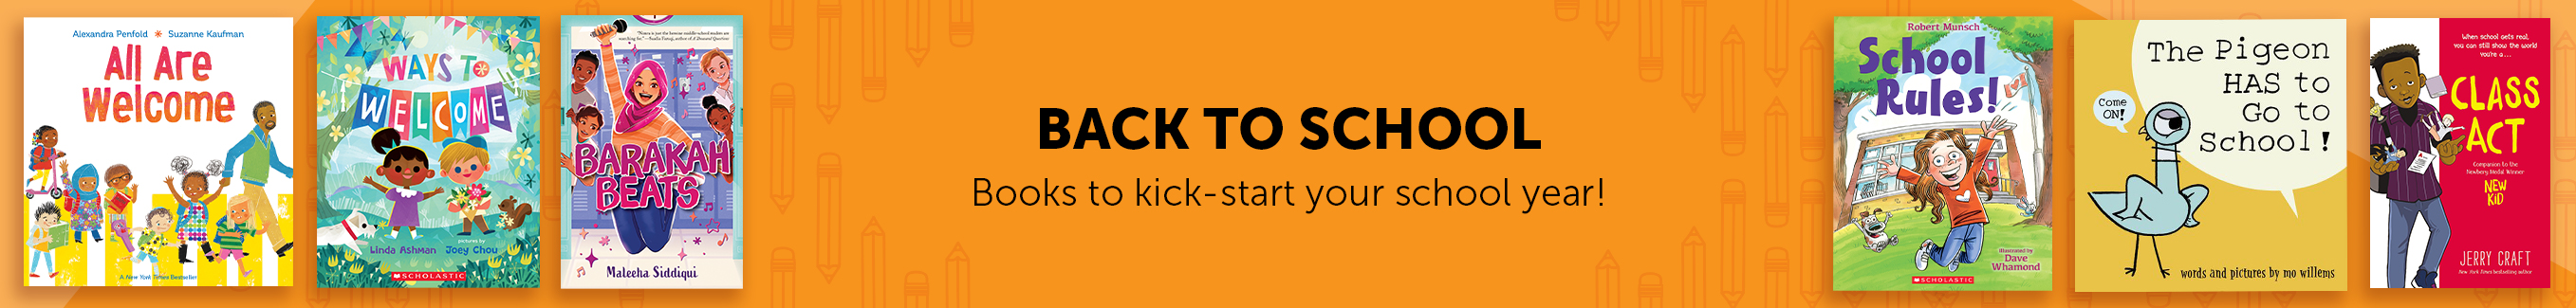 Back to School. Books to kick-start your school year!